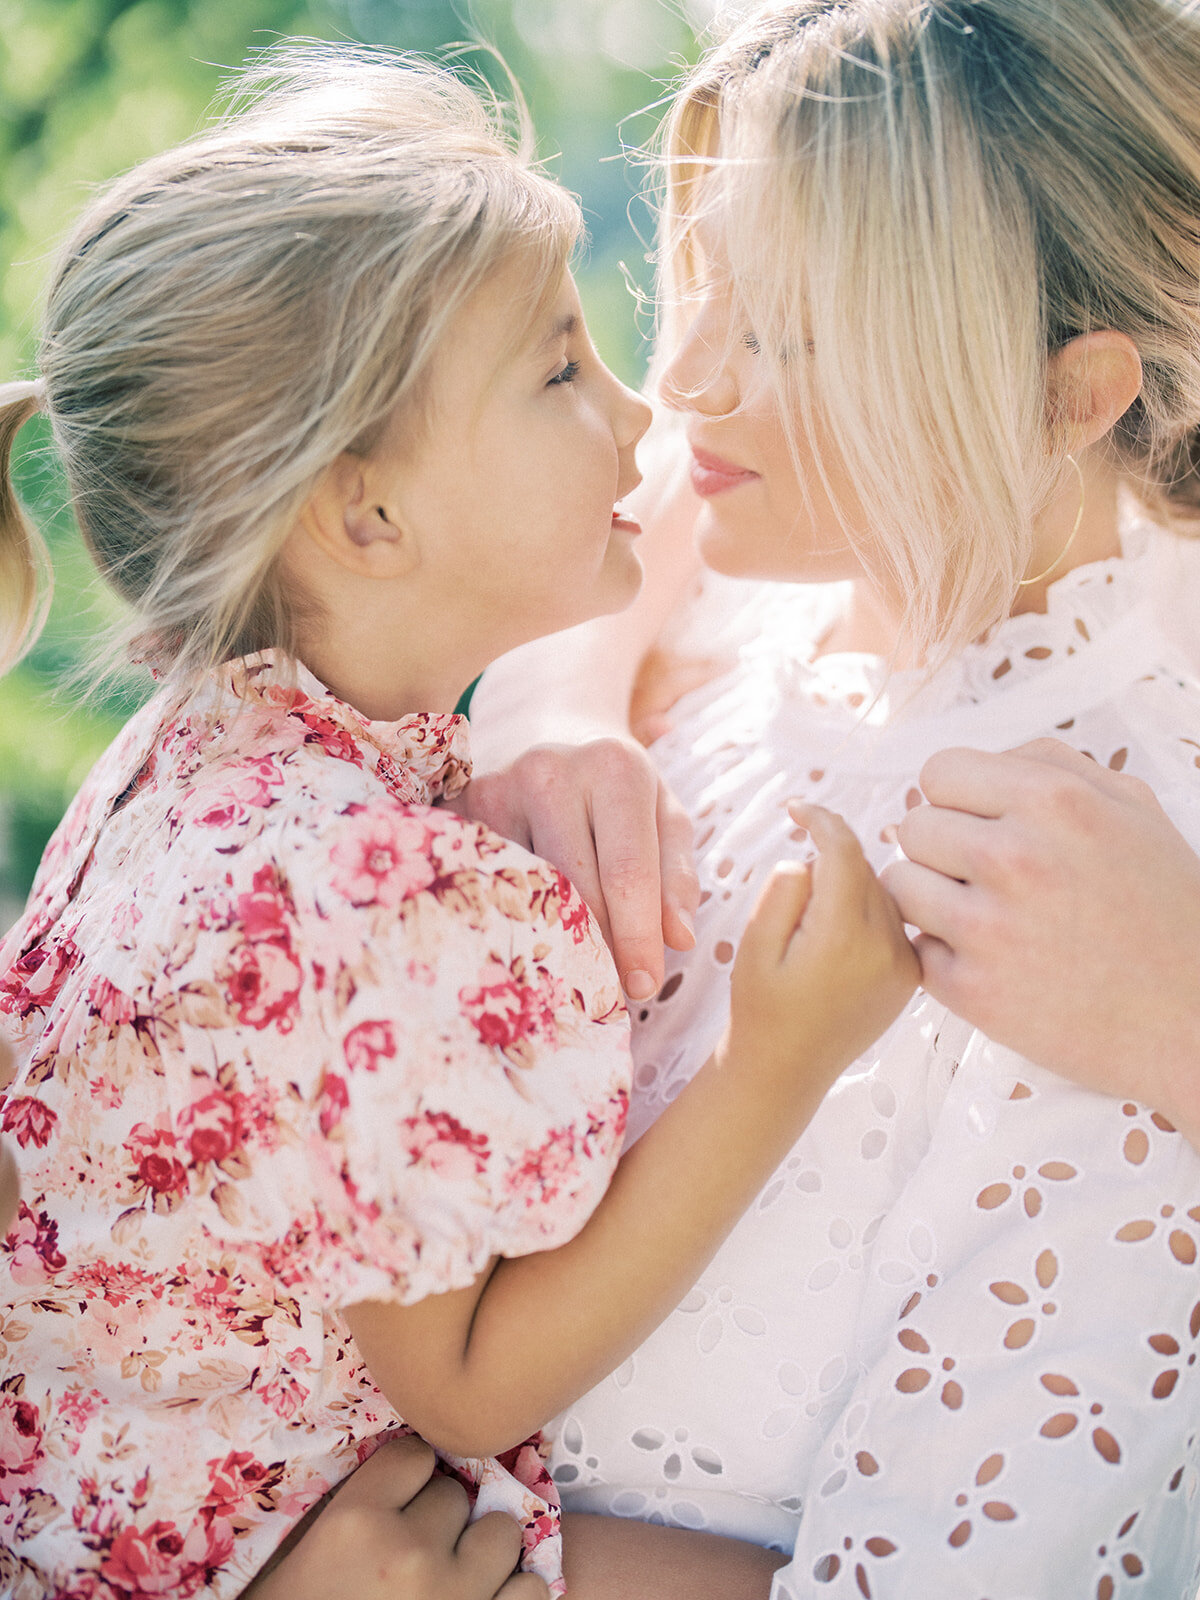 Blonde mother leans into her toddler daughter in pink dress while holding her.